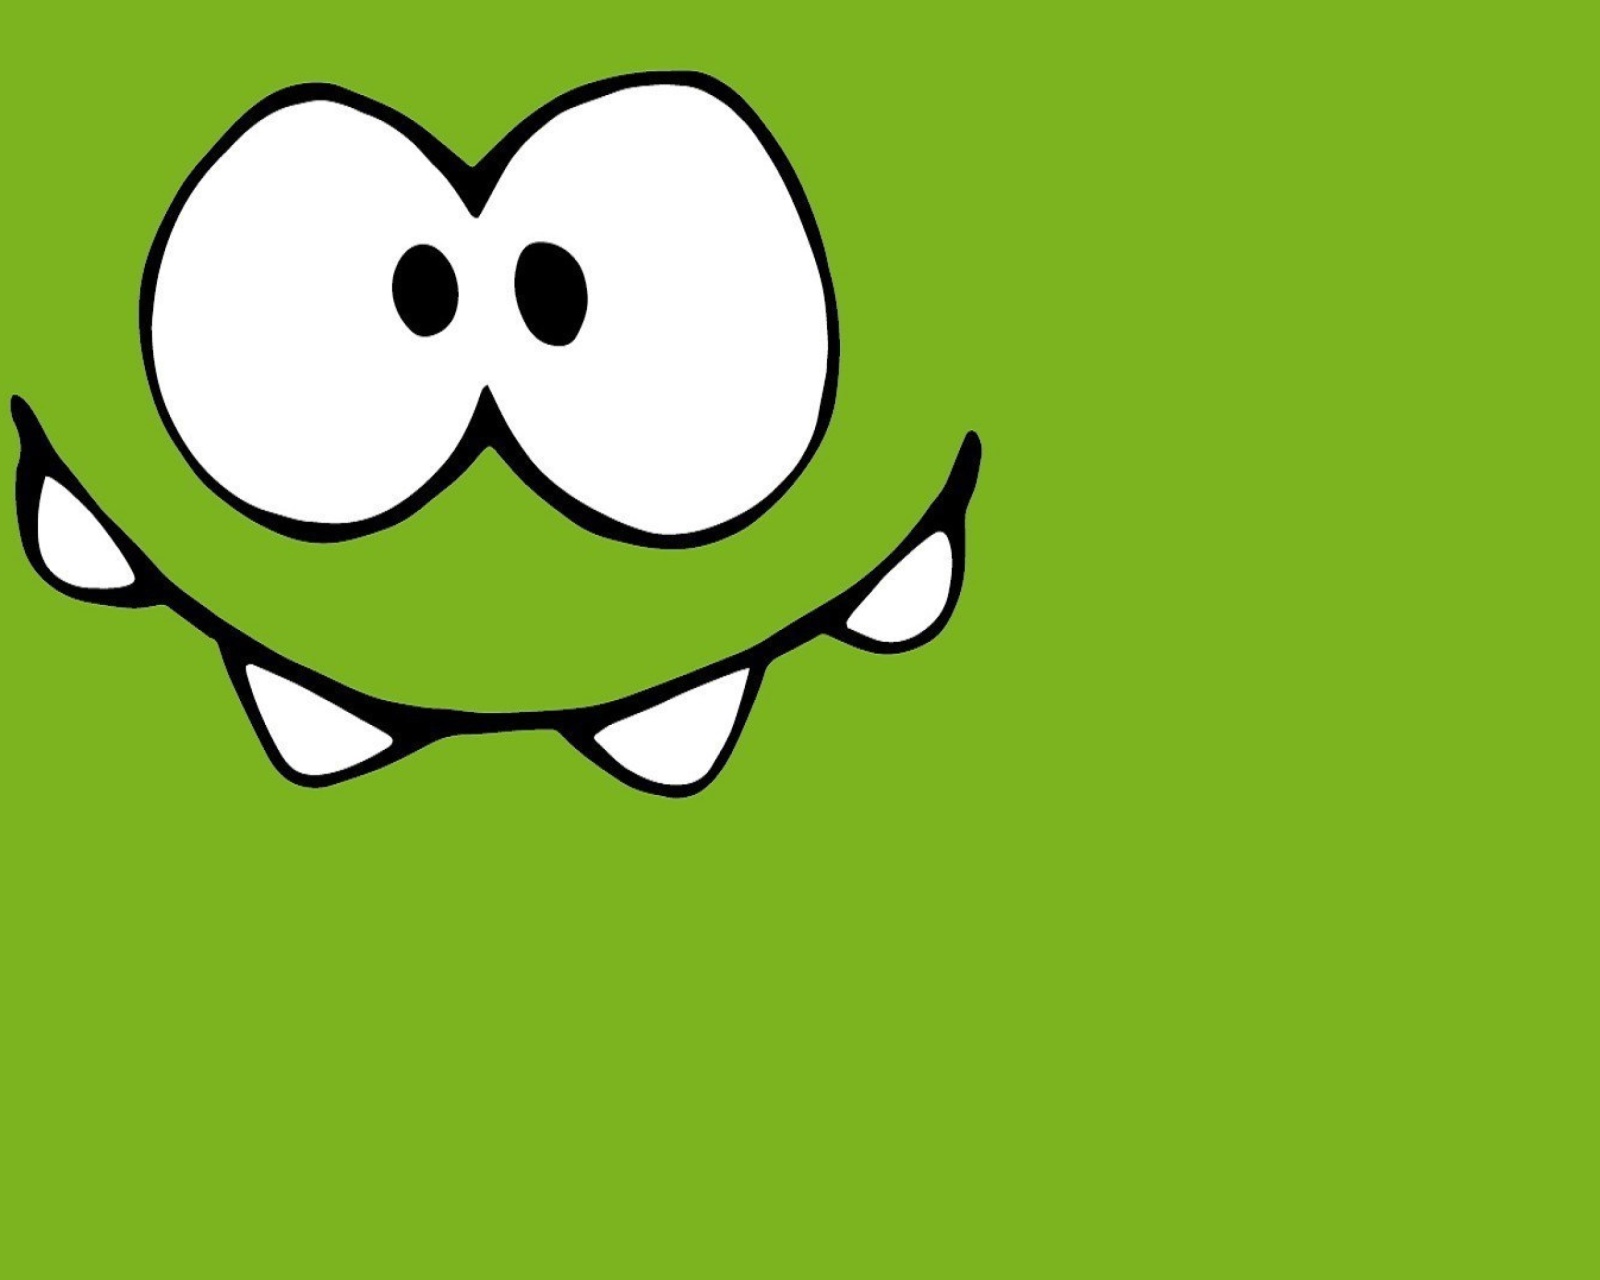 Om Nom from game Cut the Rope wallpaper 1600x1280